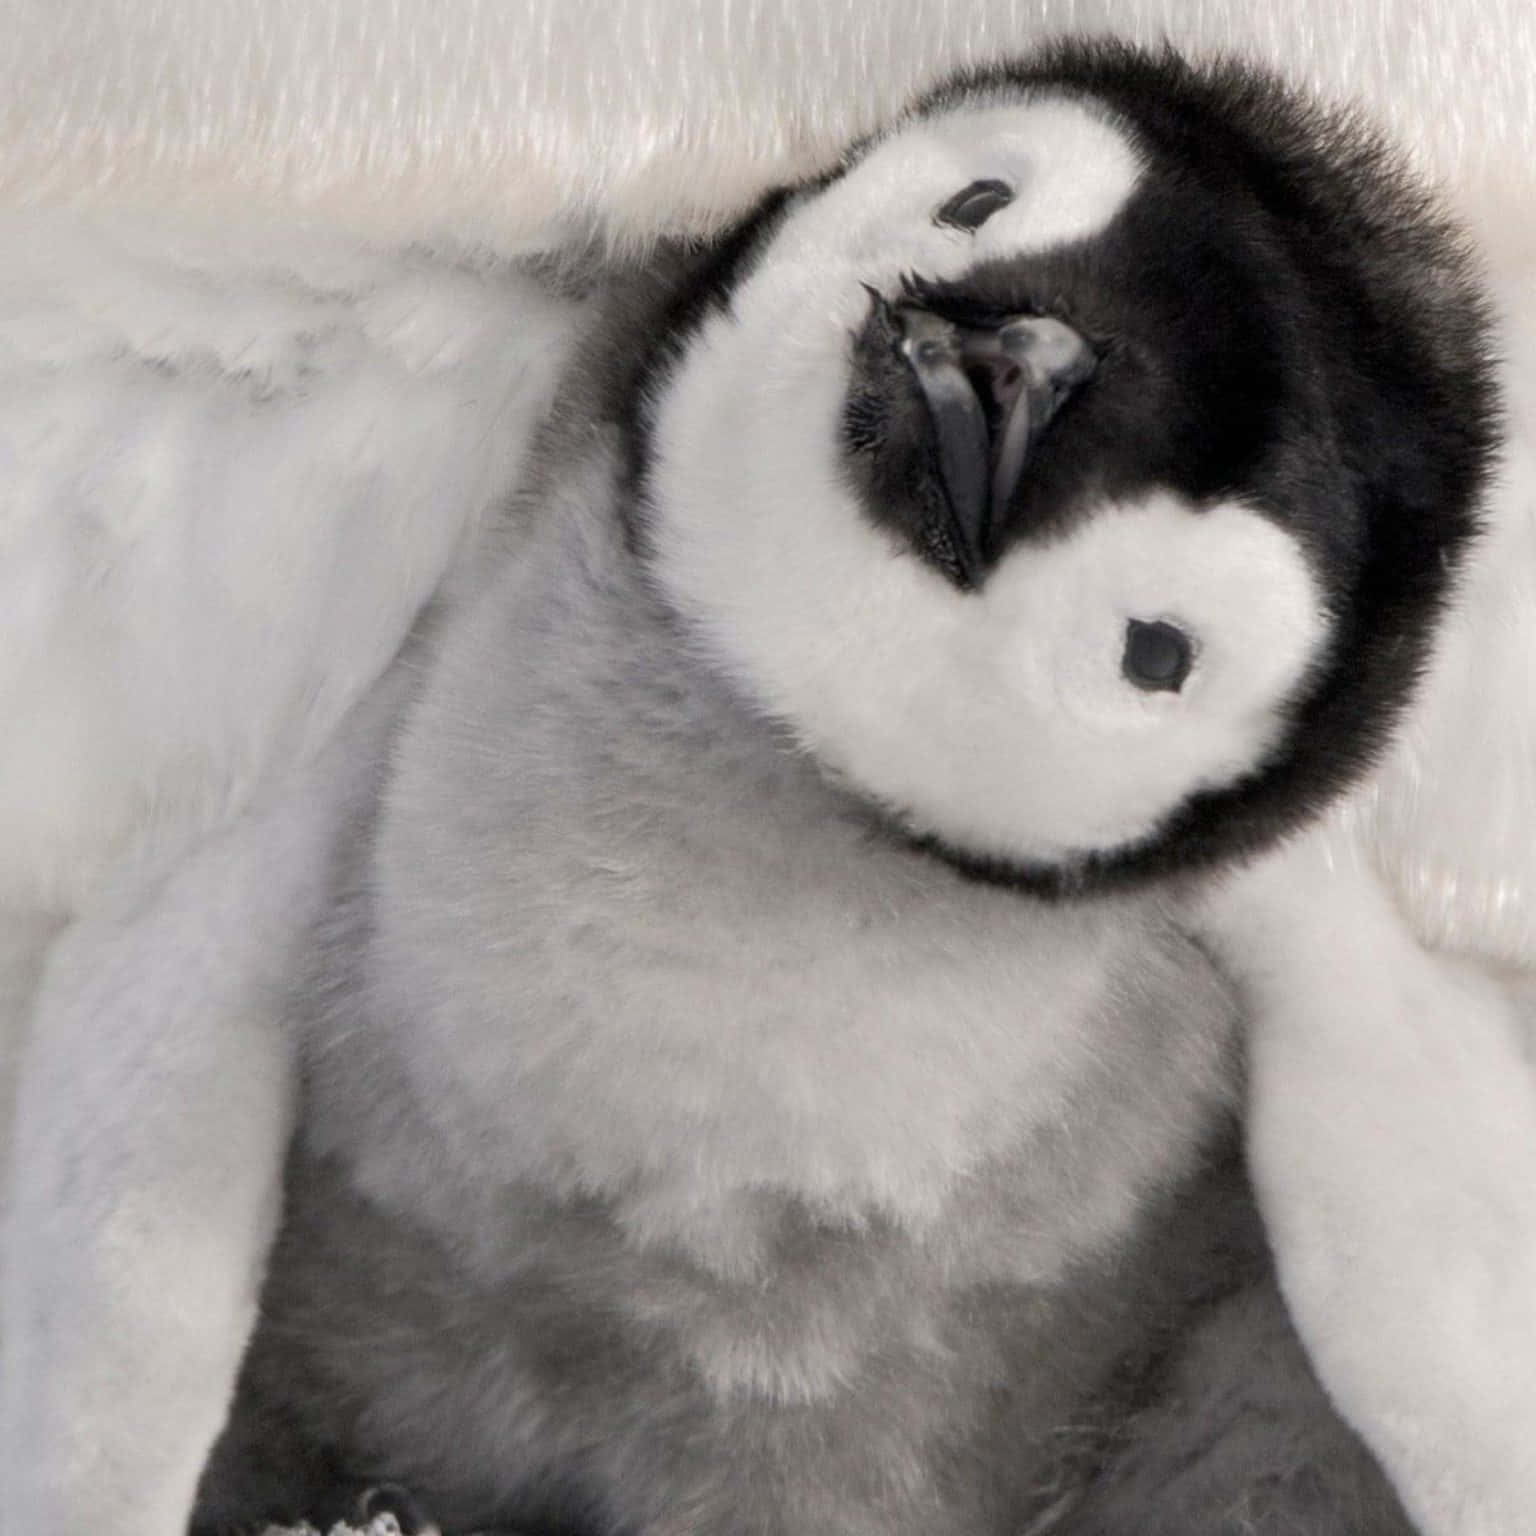 Aww, look at this cute and cuddly baby penguin!